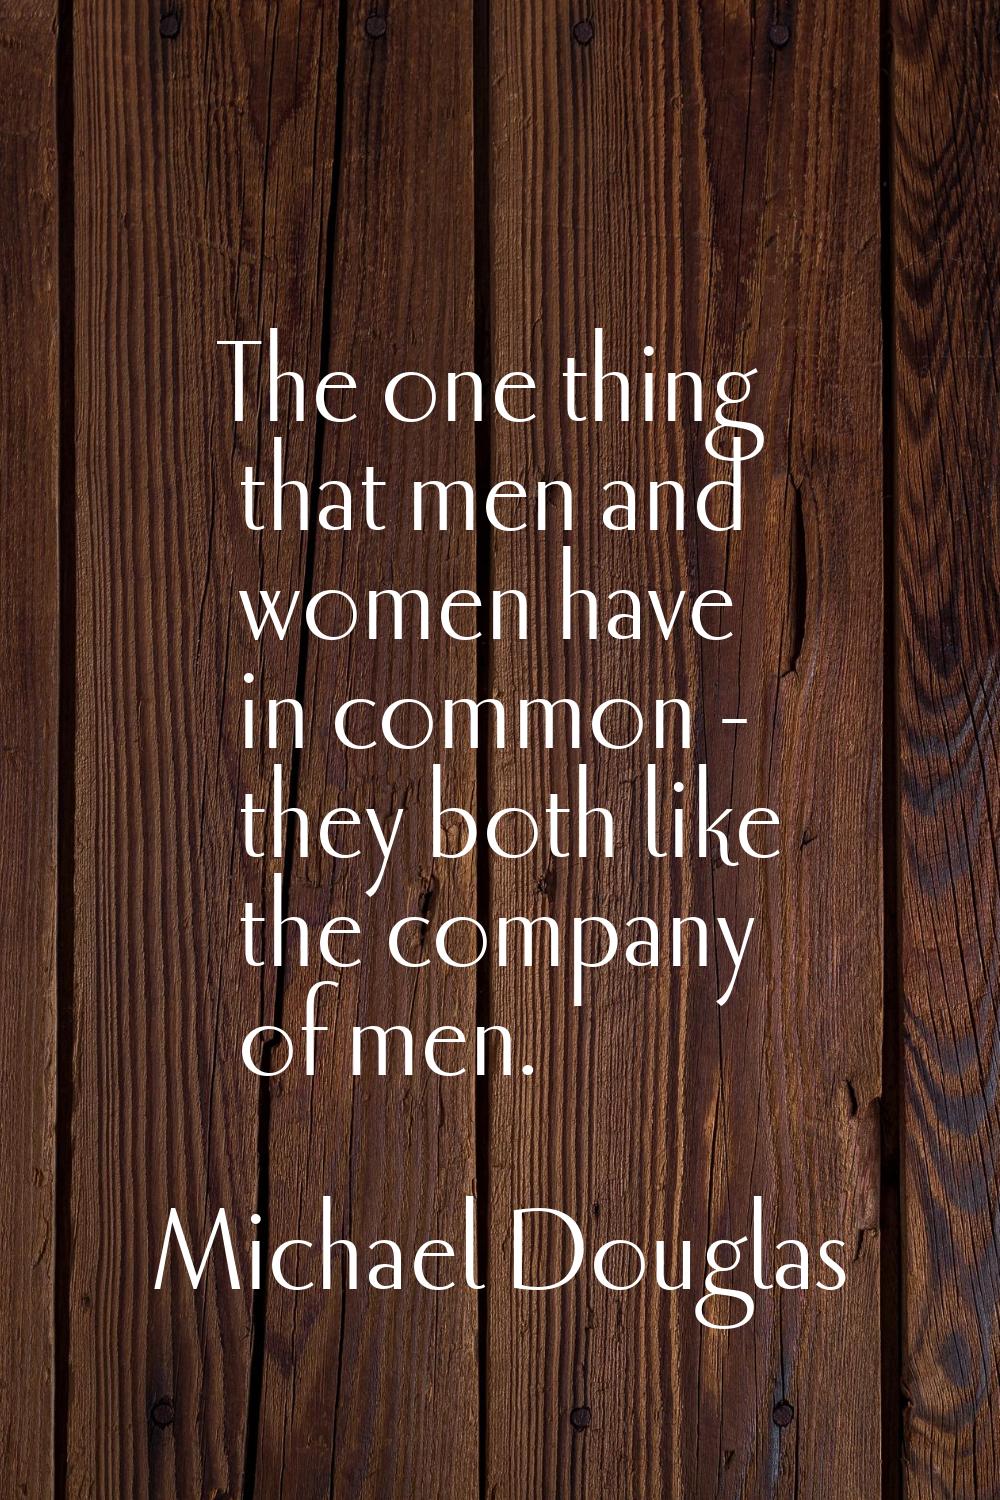 The one thing that men and women have in common - they both like the company of men.